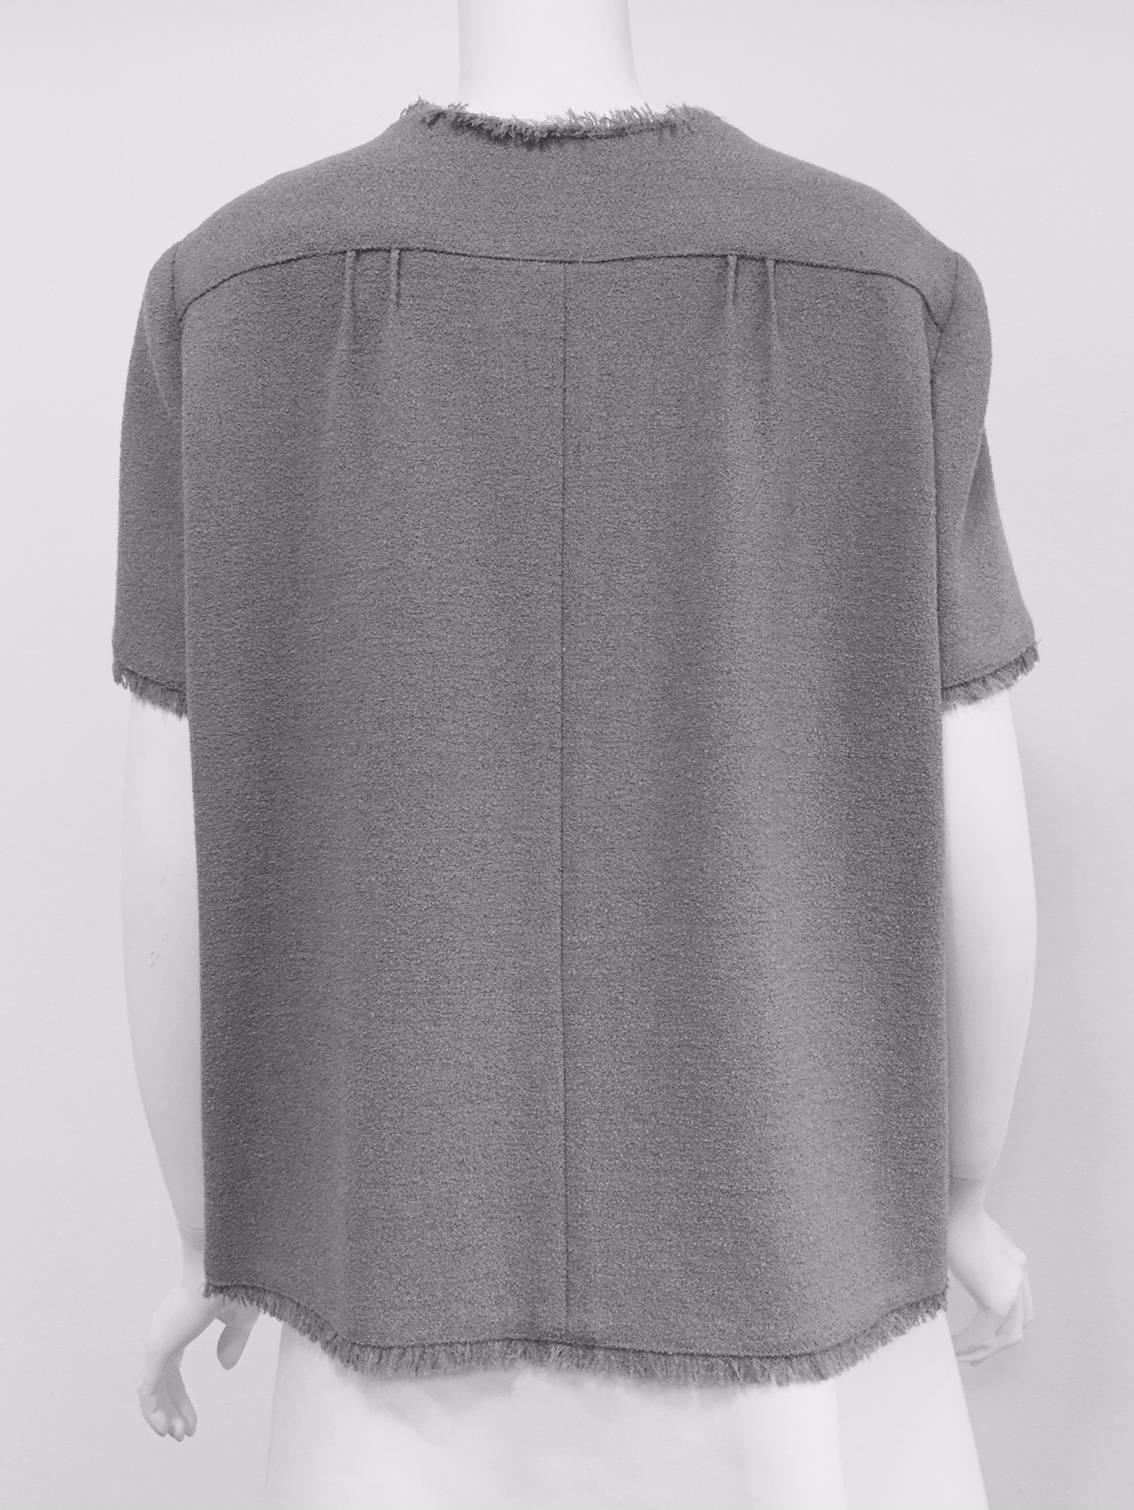 Gray Chanel Cruise 2008 Steel Grey Wool Short Sleeve Blouse With Chain Weight at Hem